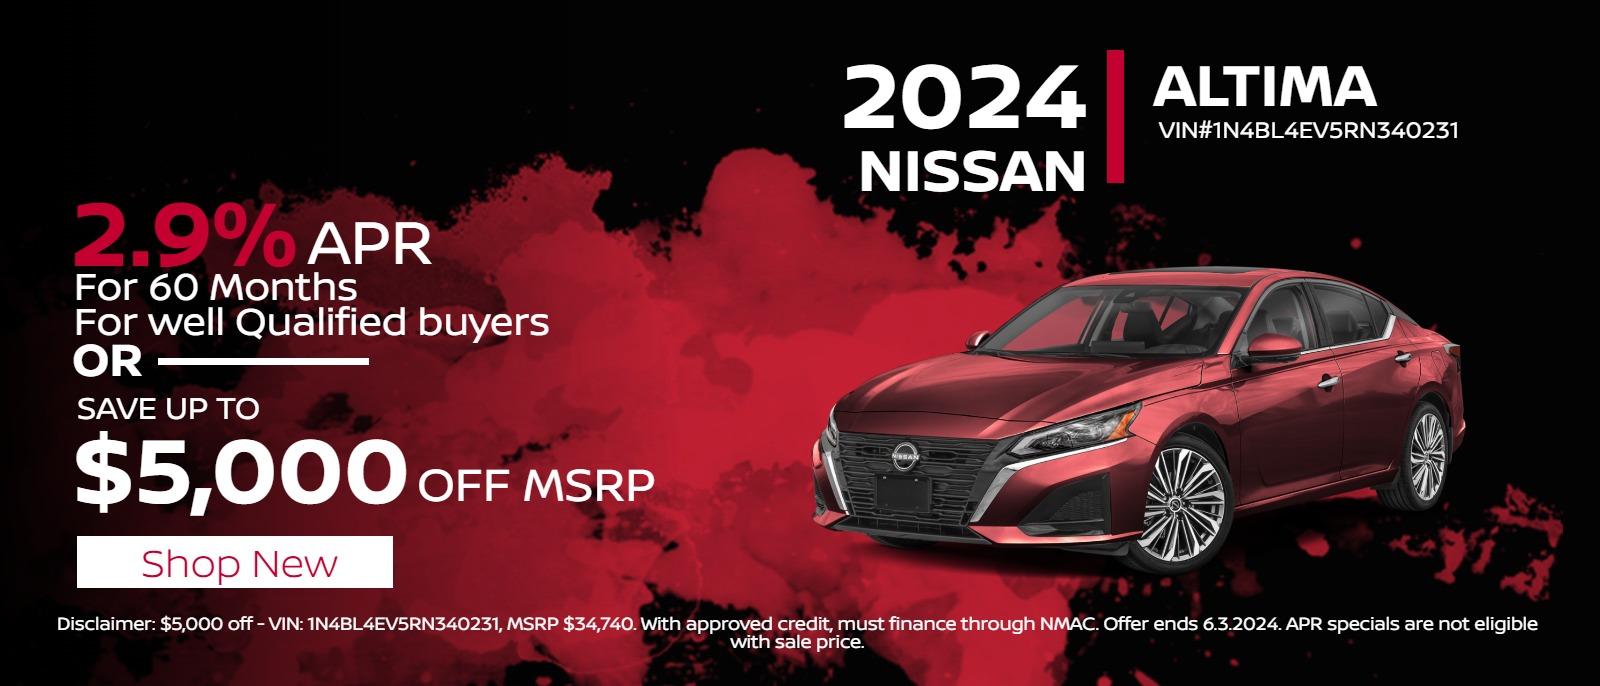 2024 Nissan Altima
Save up to
$5,000
Off MSRP

Or

2.9%
APR Financing
For 60 mos.
For well Qualified buyers